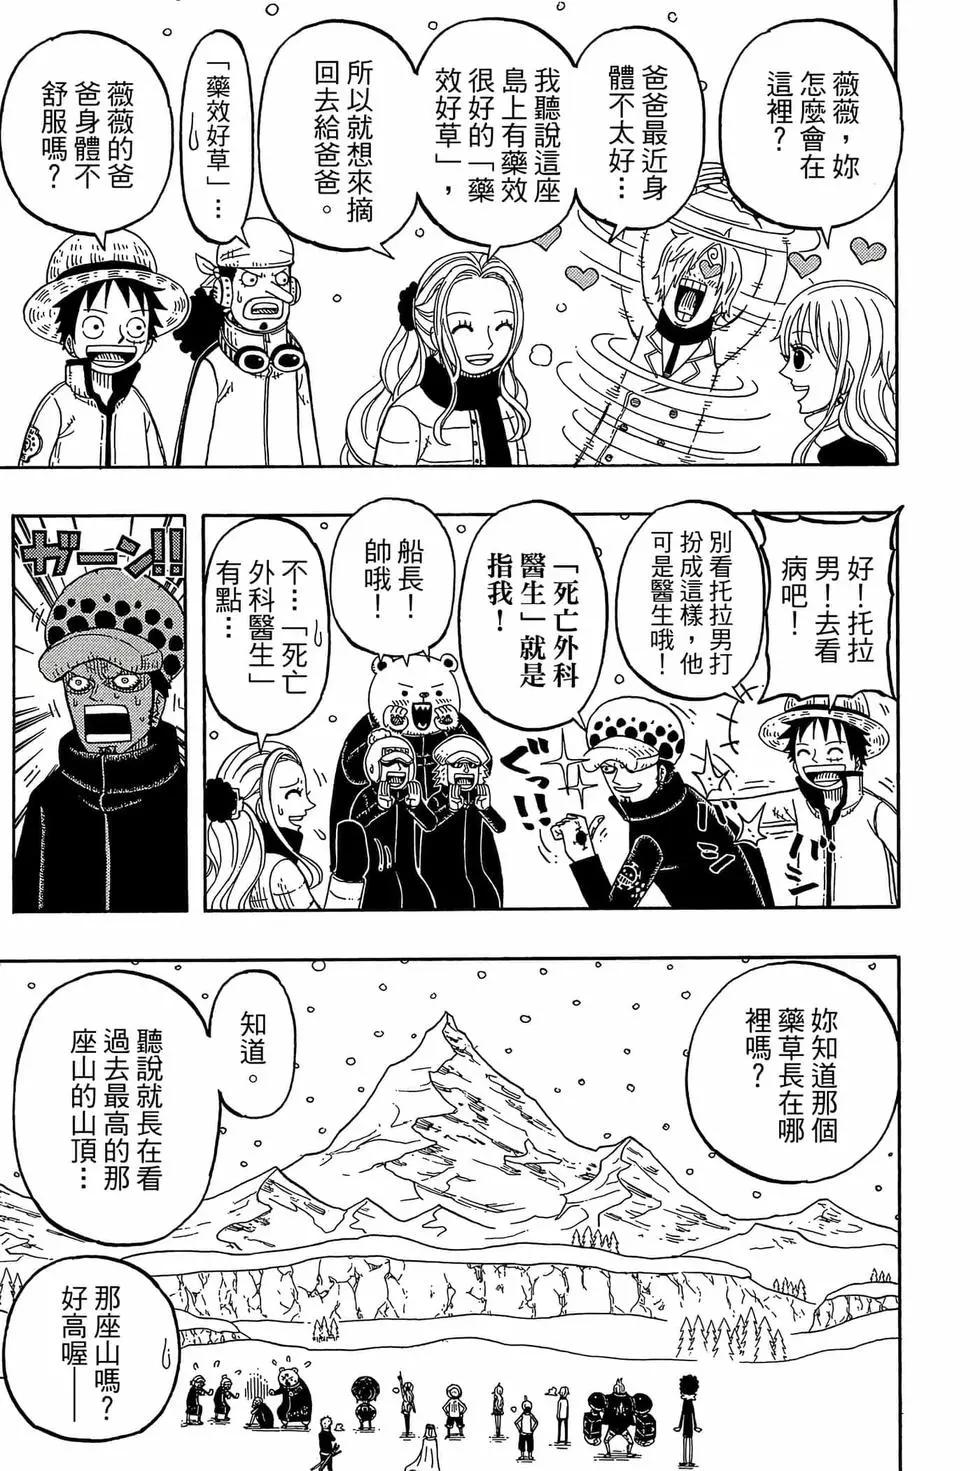 One piece party - 第03卷(1/4) - 4